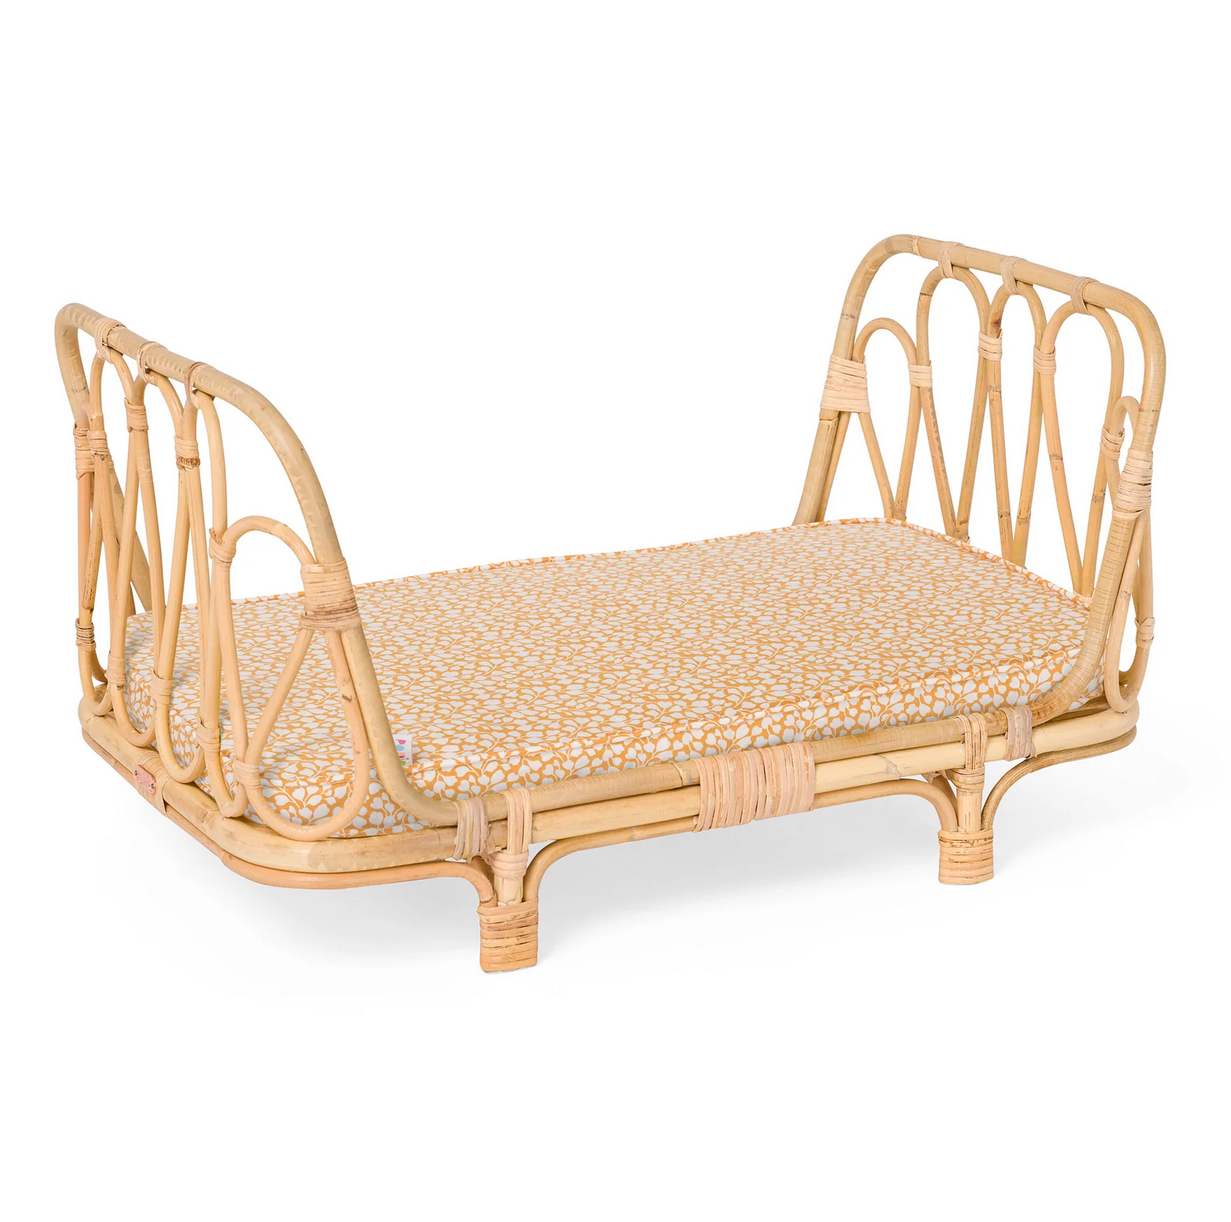 Poppie Toys Rattan Doll Daybed - Signature Collection